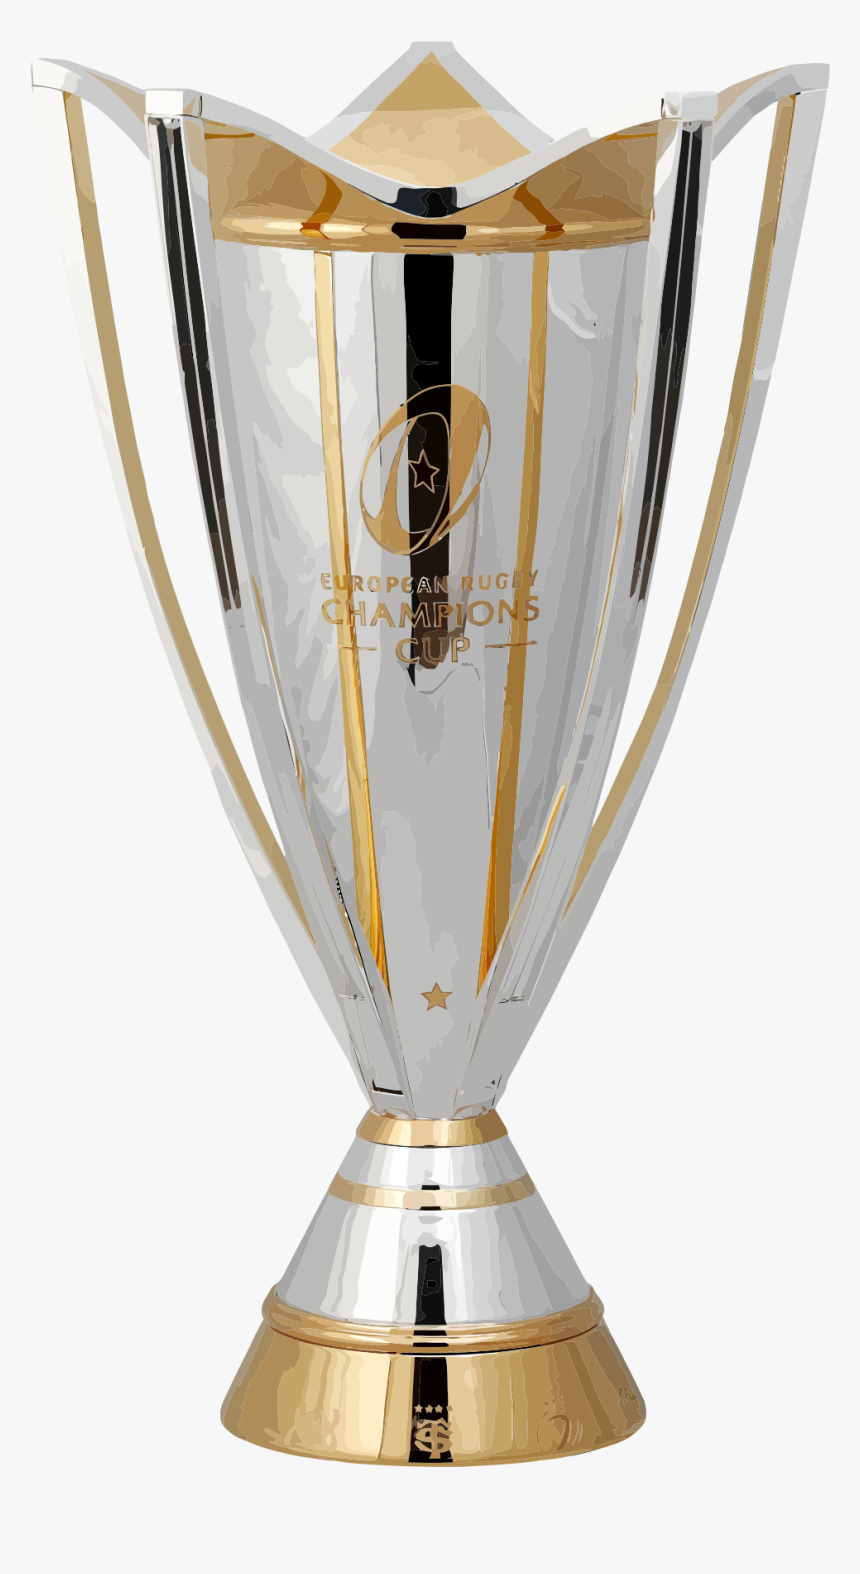 European Rugby Champions Cup Trophy, HD Png Download, Free Download